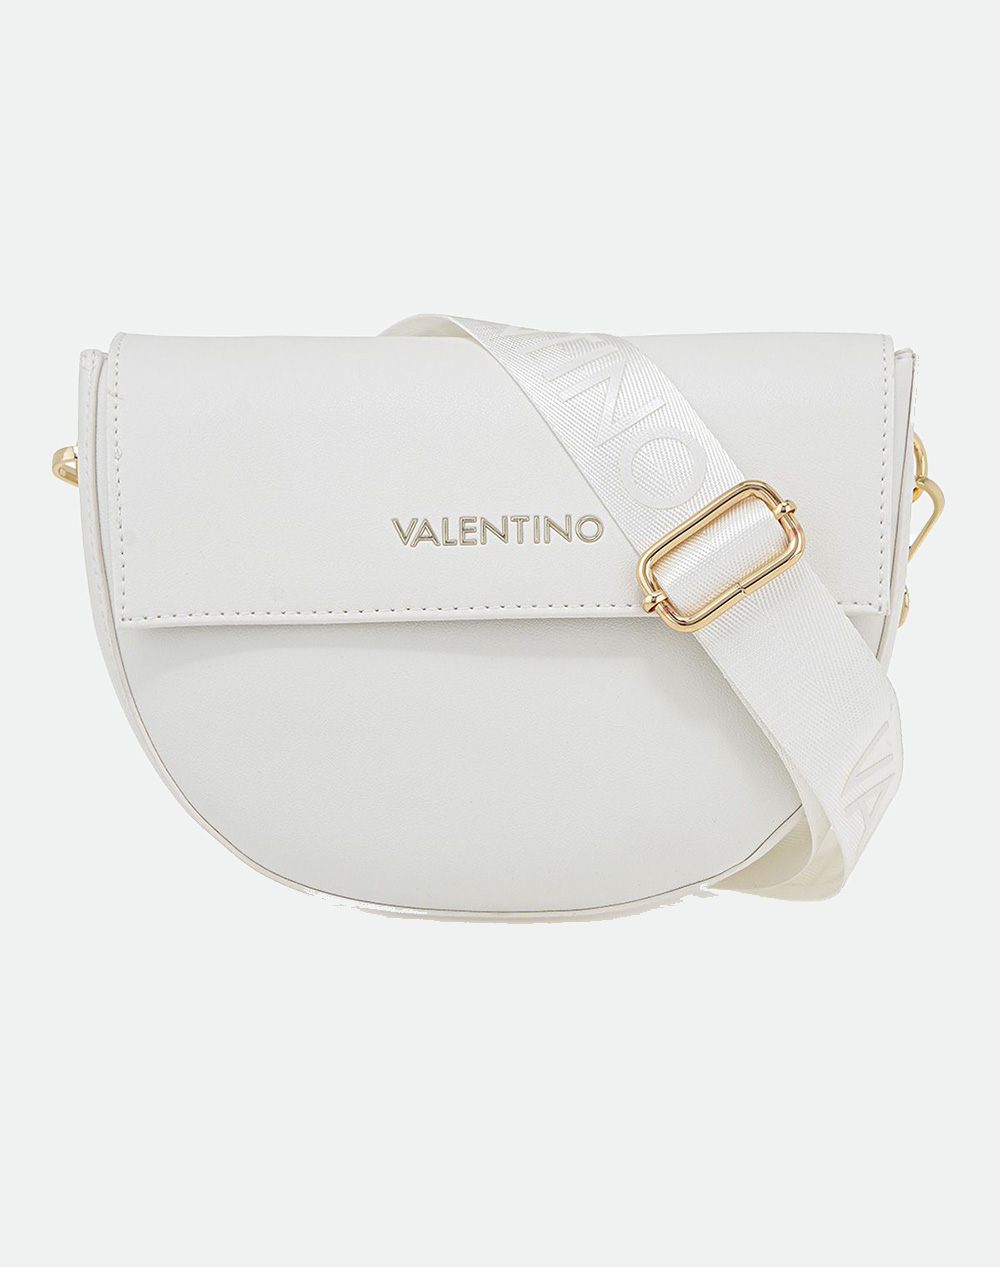 VALENTINO BAGS ΤΣΑΝΤΕΣ ΤΑΧΥΔΡΟΜΟΥ /CROSS BODY (Διαστάσεις: 25 x 19 x 8 εκ) S61683429651-651 White